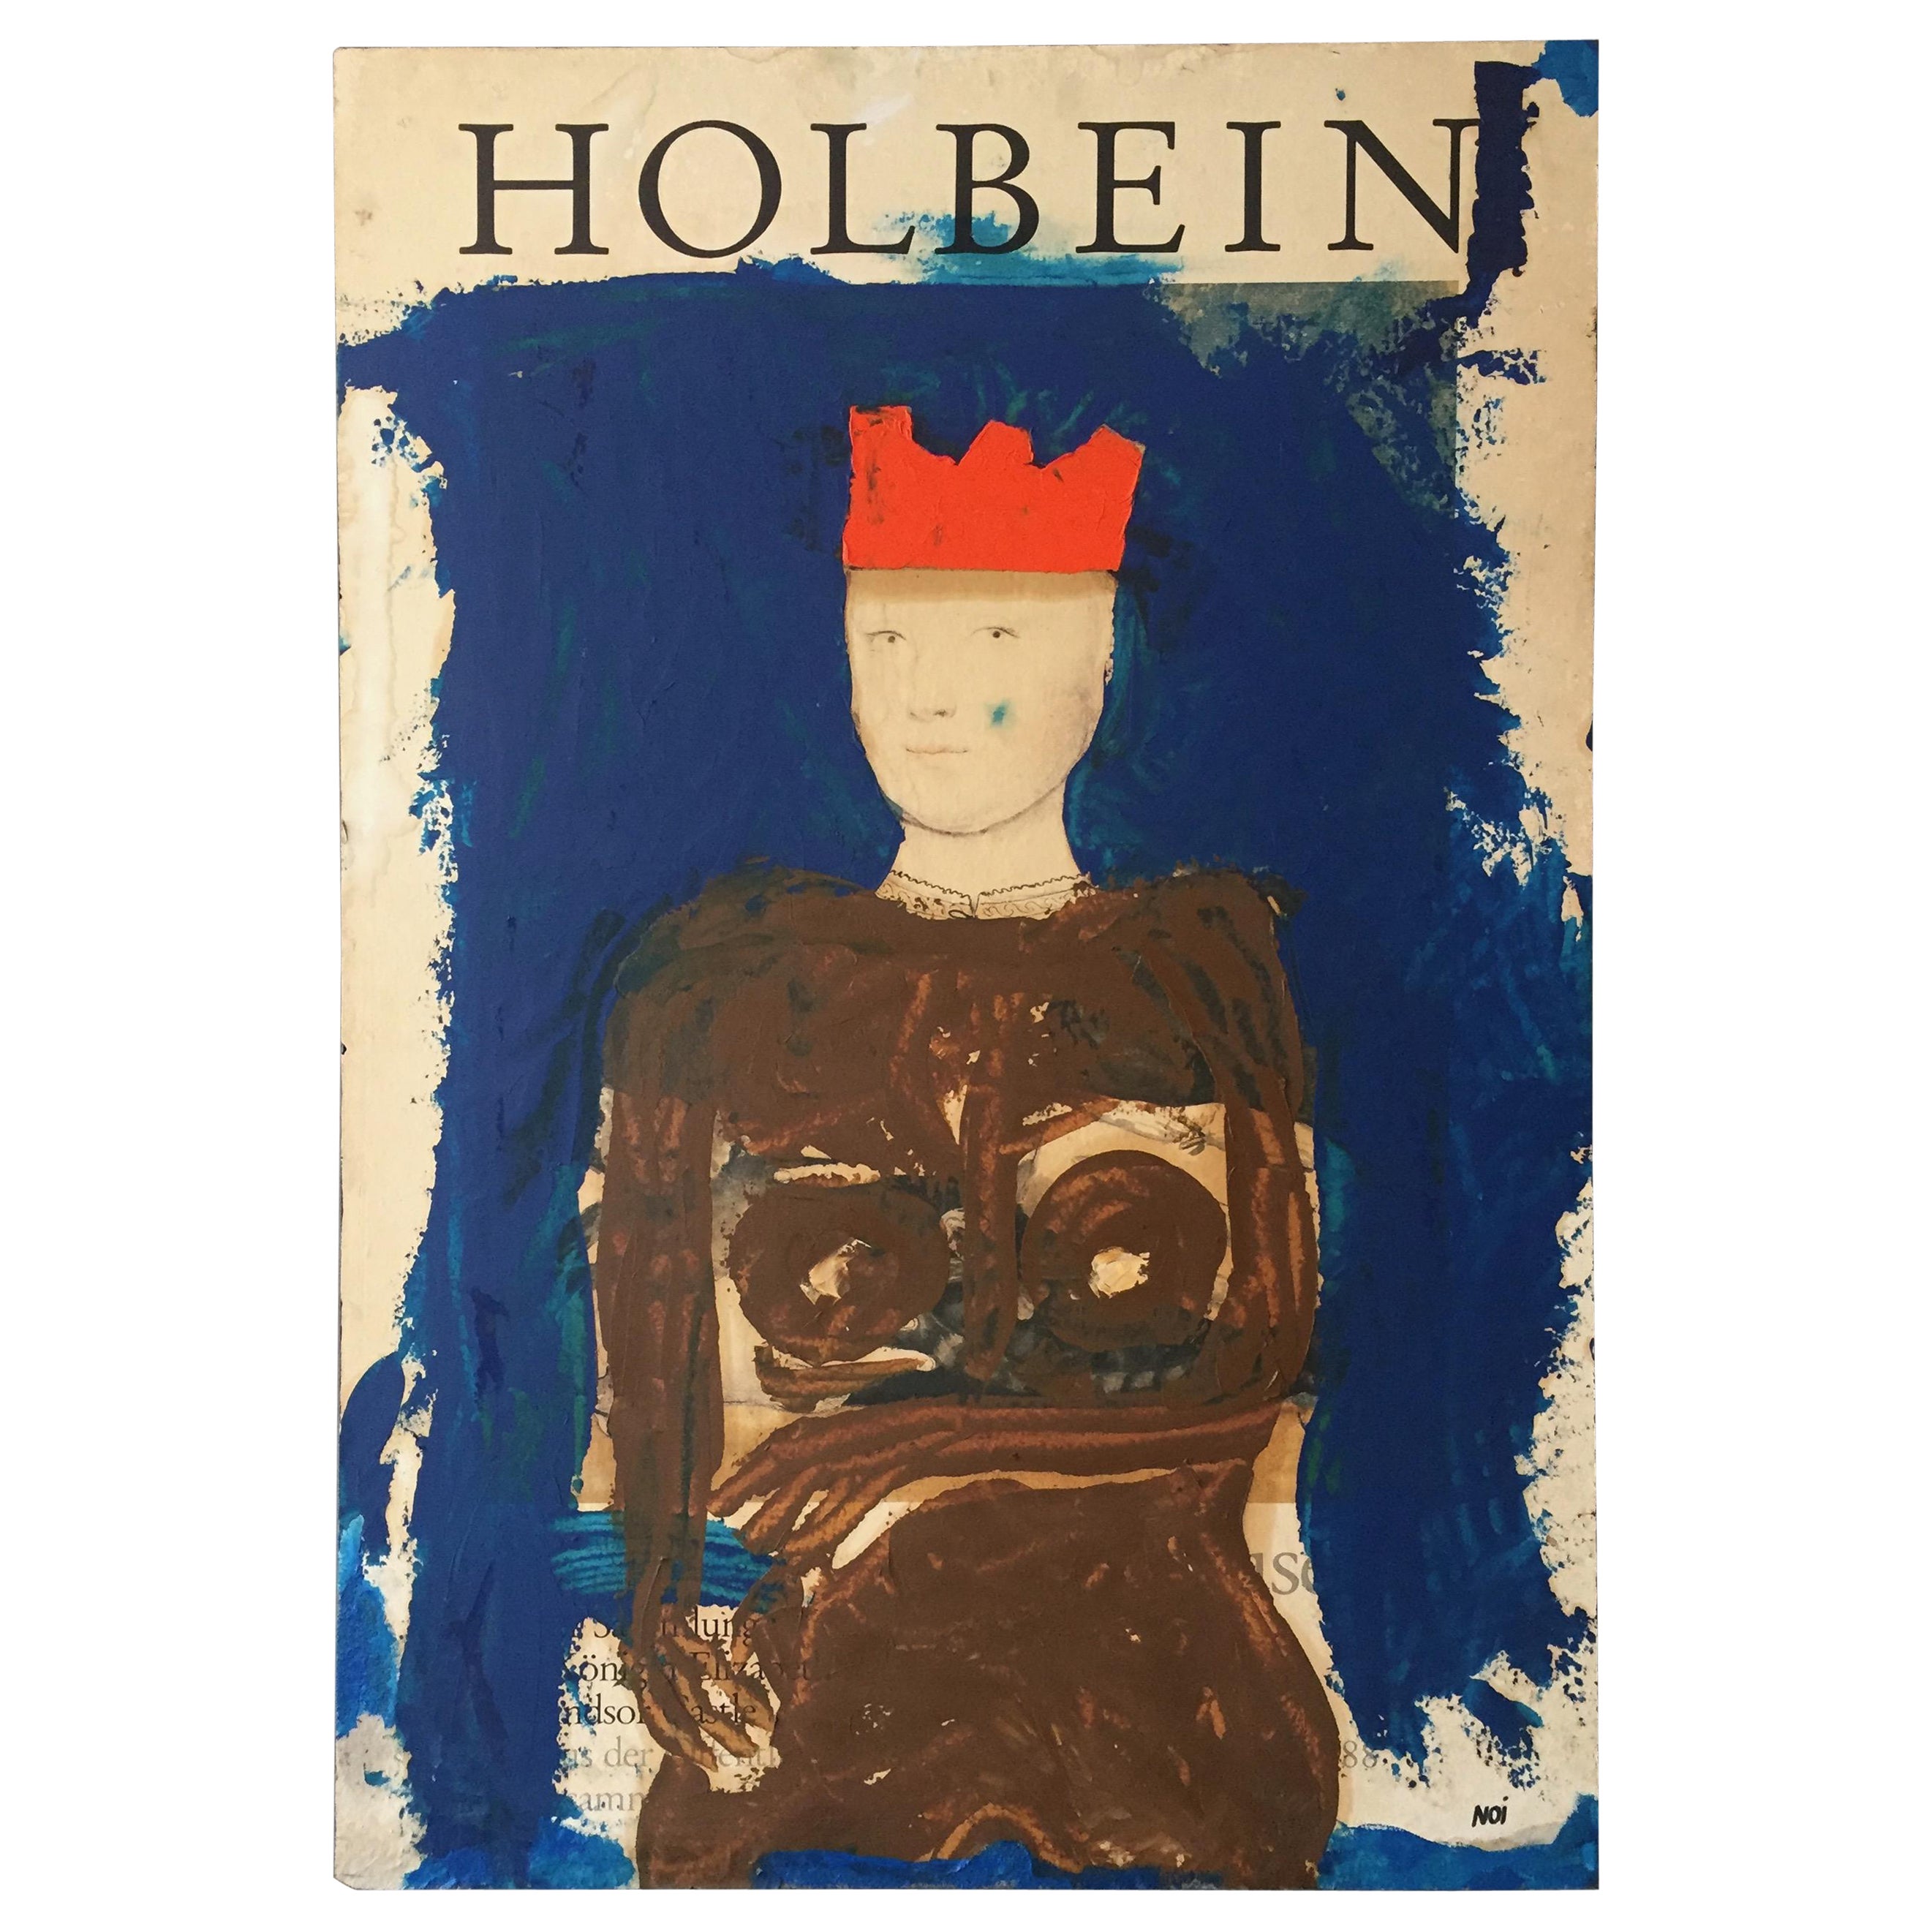 Holbein re-visited by Markus Friedrich Staab 1994